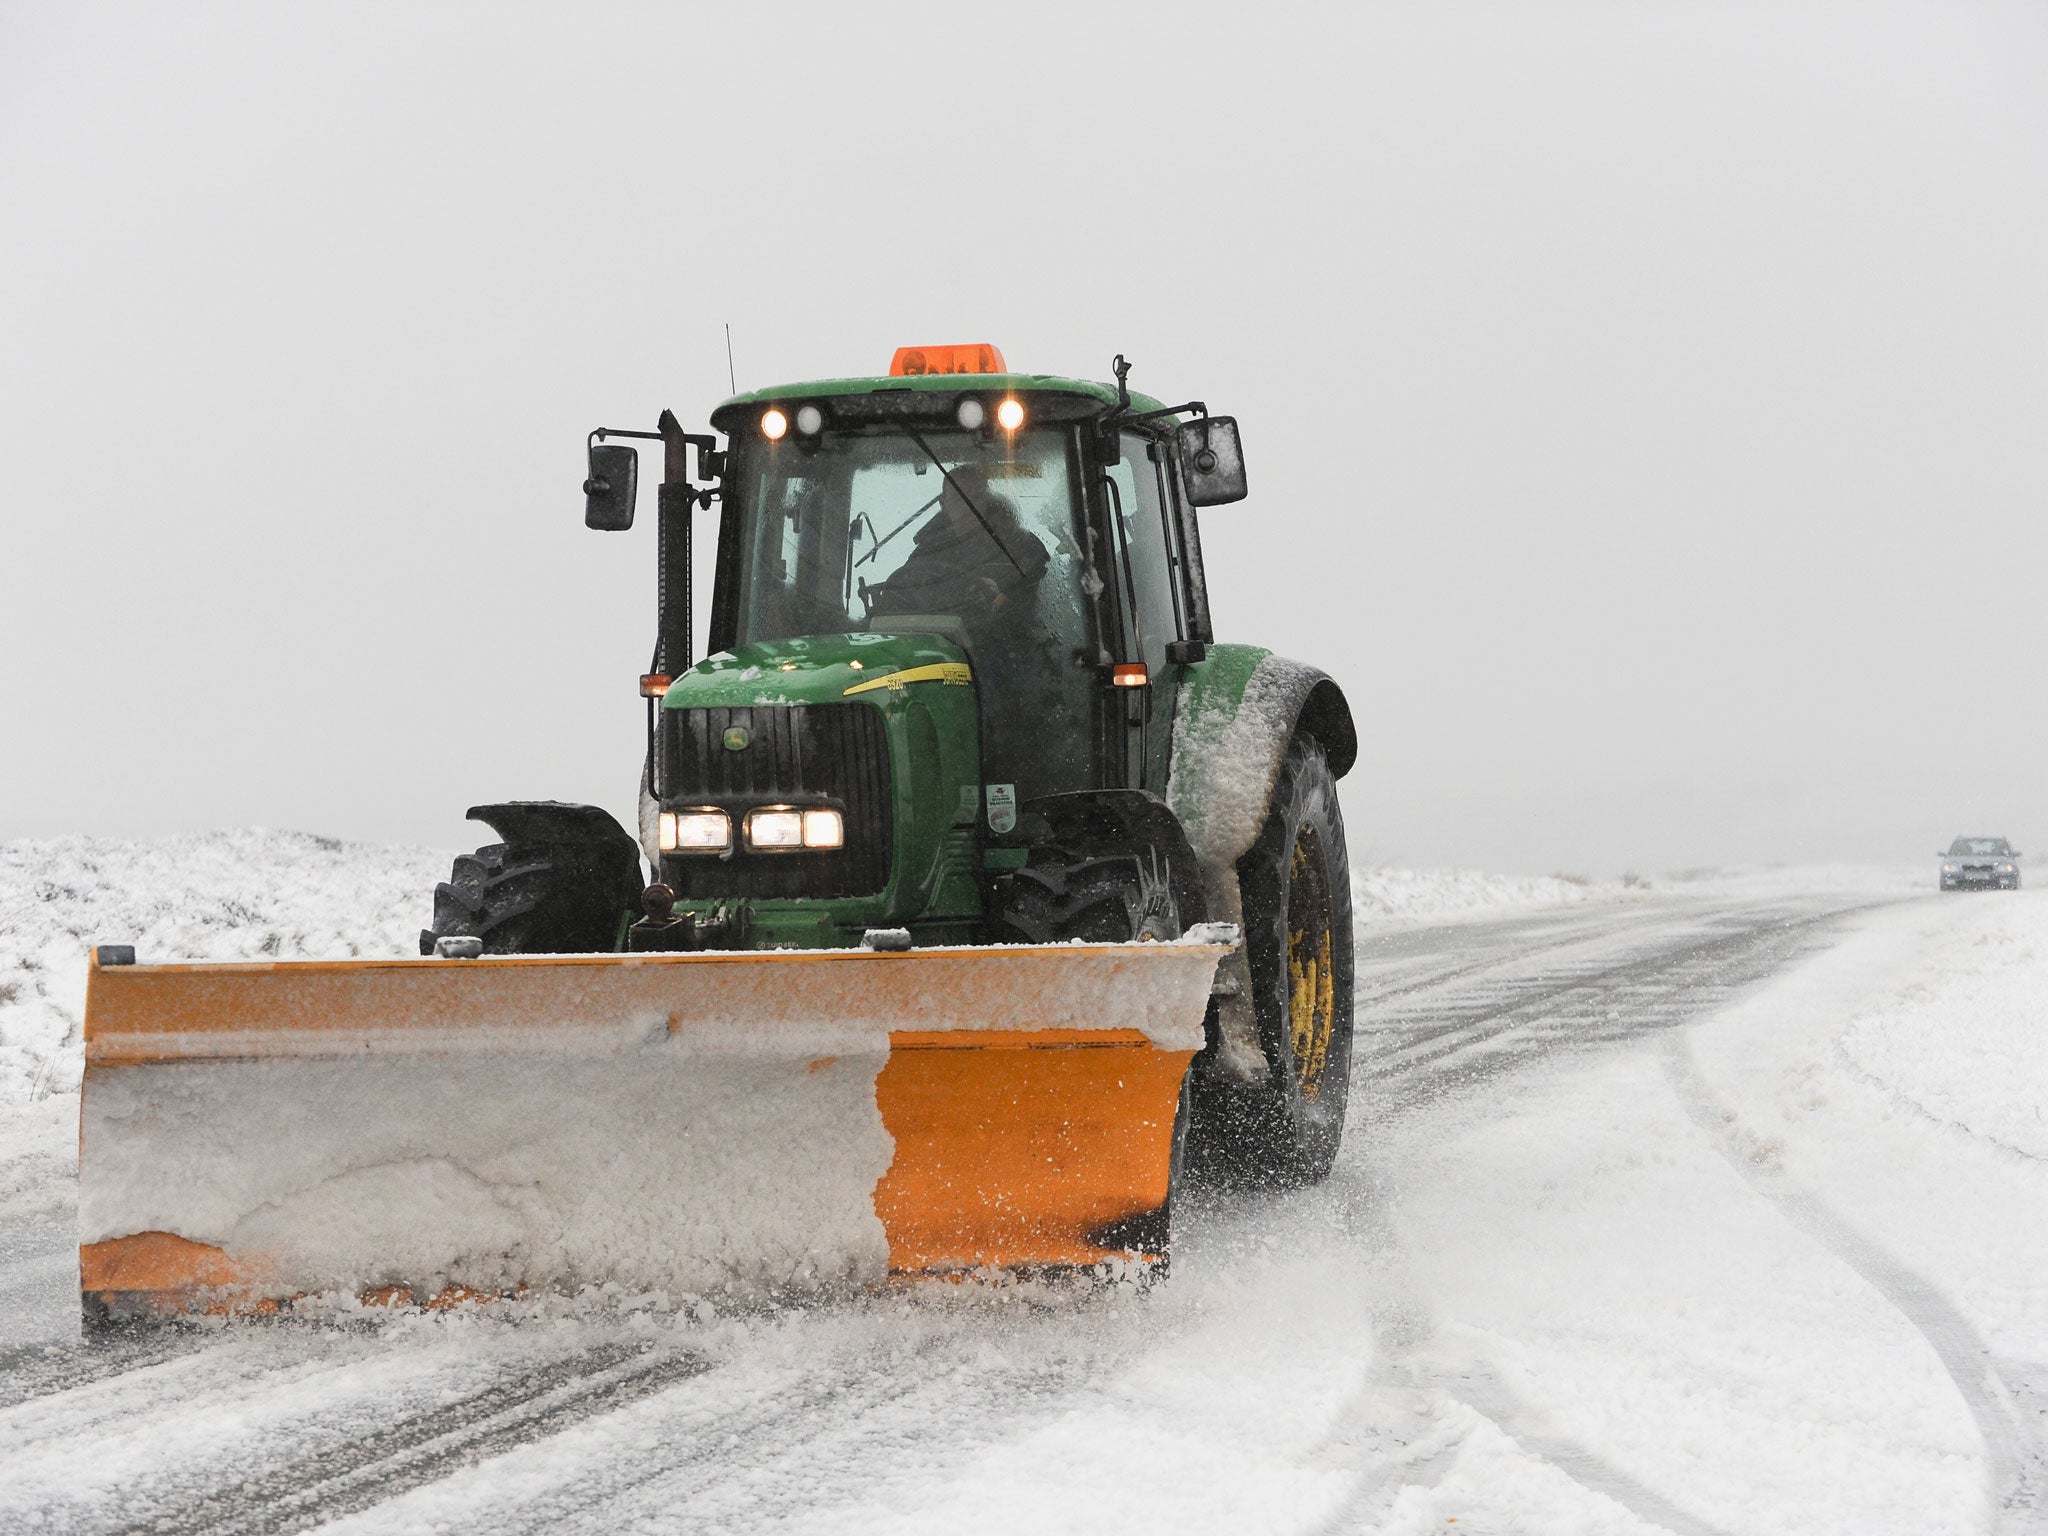 A snowplough driver saw the car in a ditch and alerted police